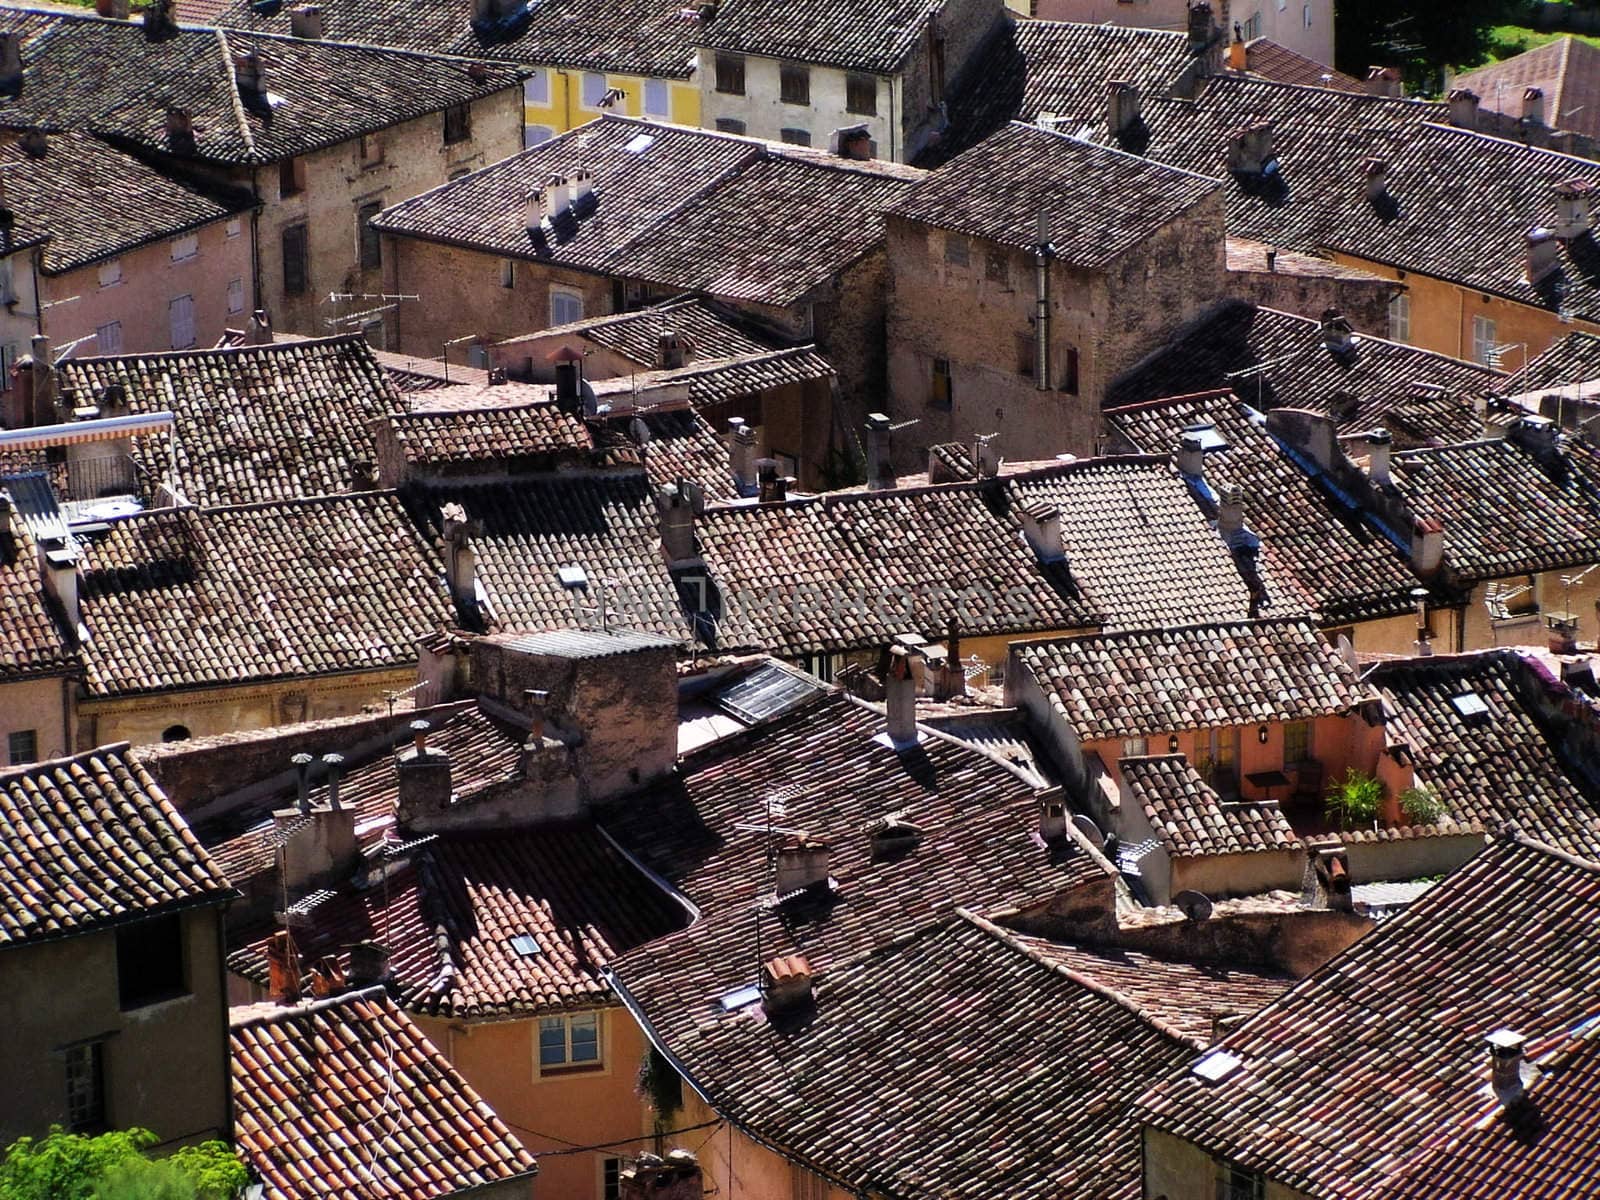 Roofs in small village in France - Provence